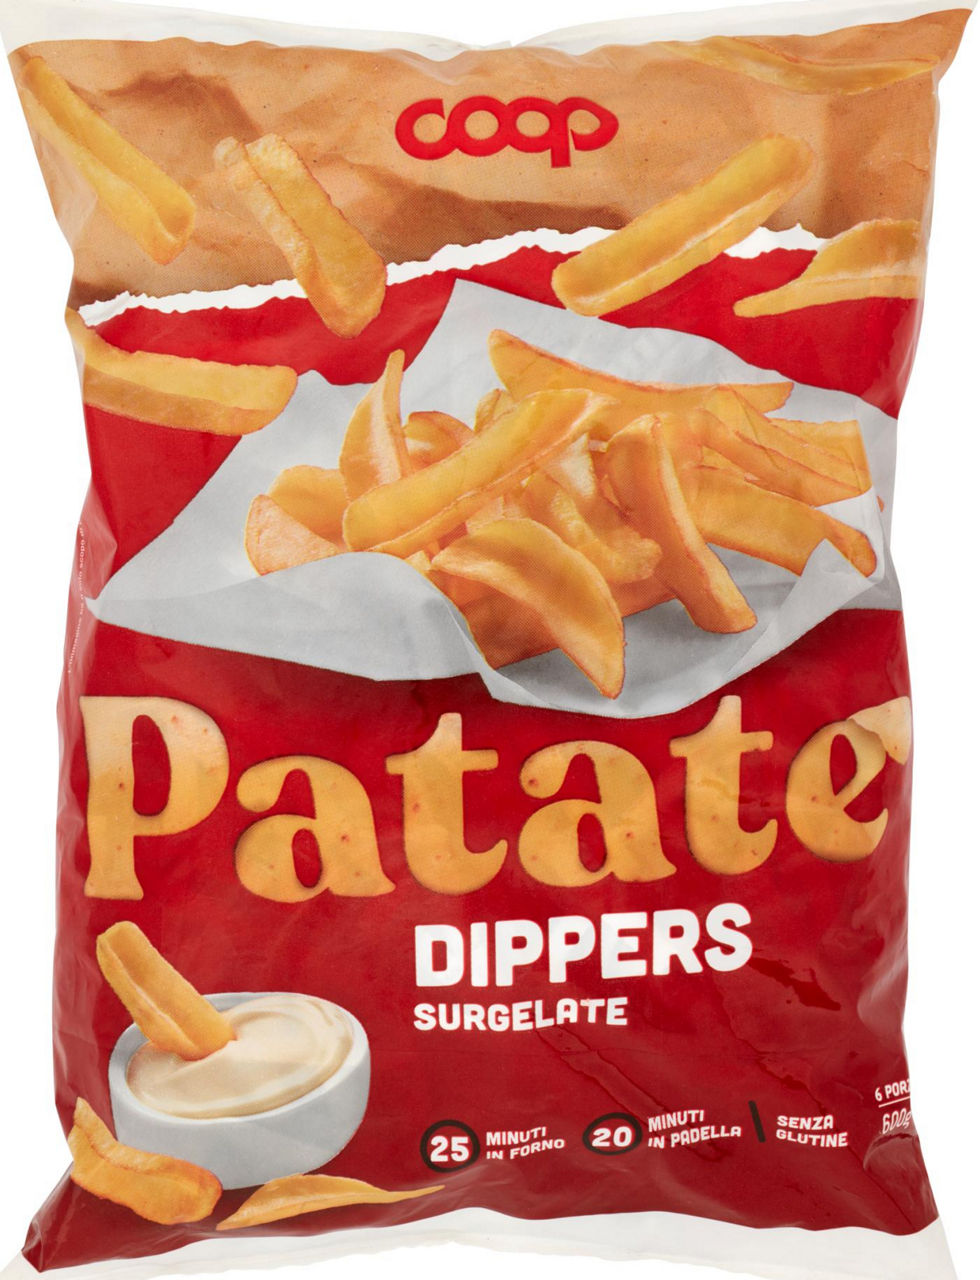 Patate dippers coop busta g 600